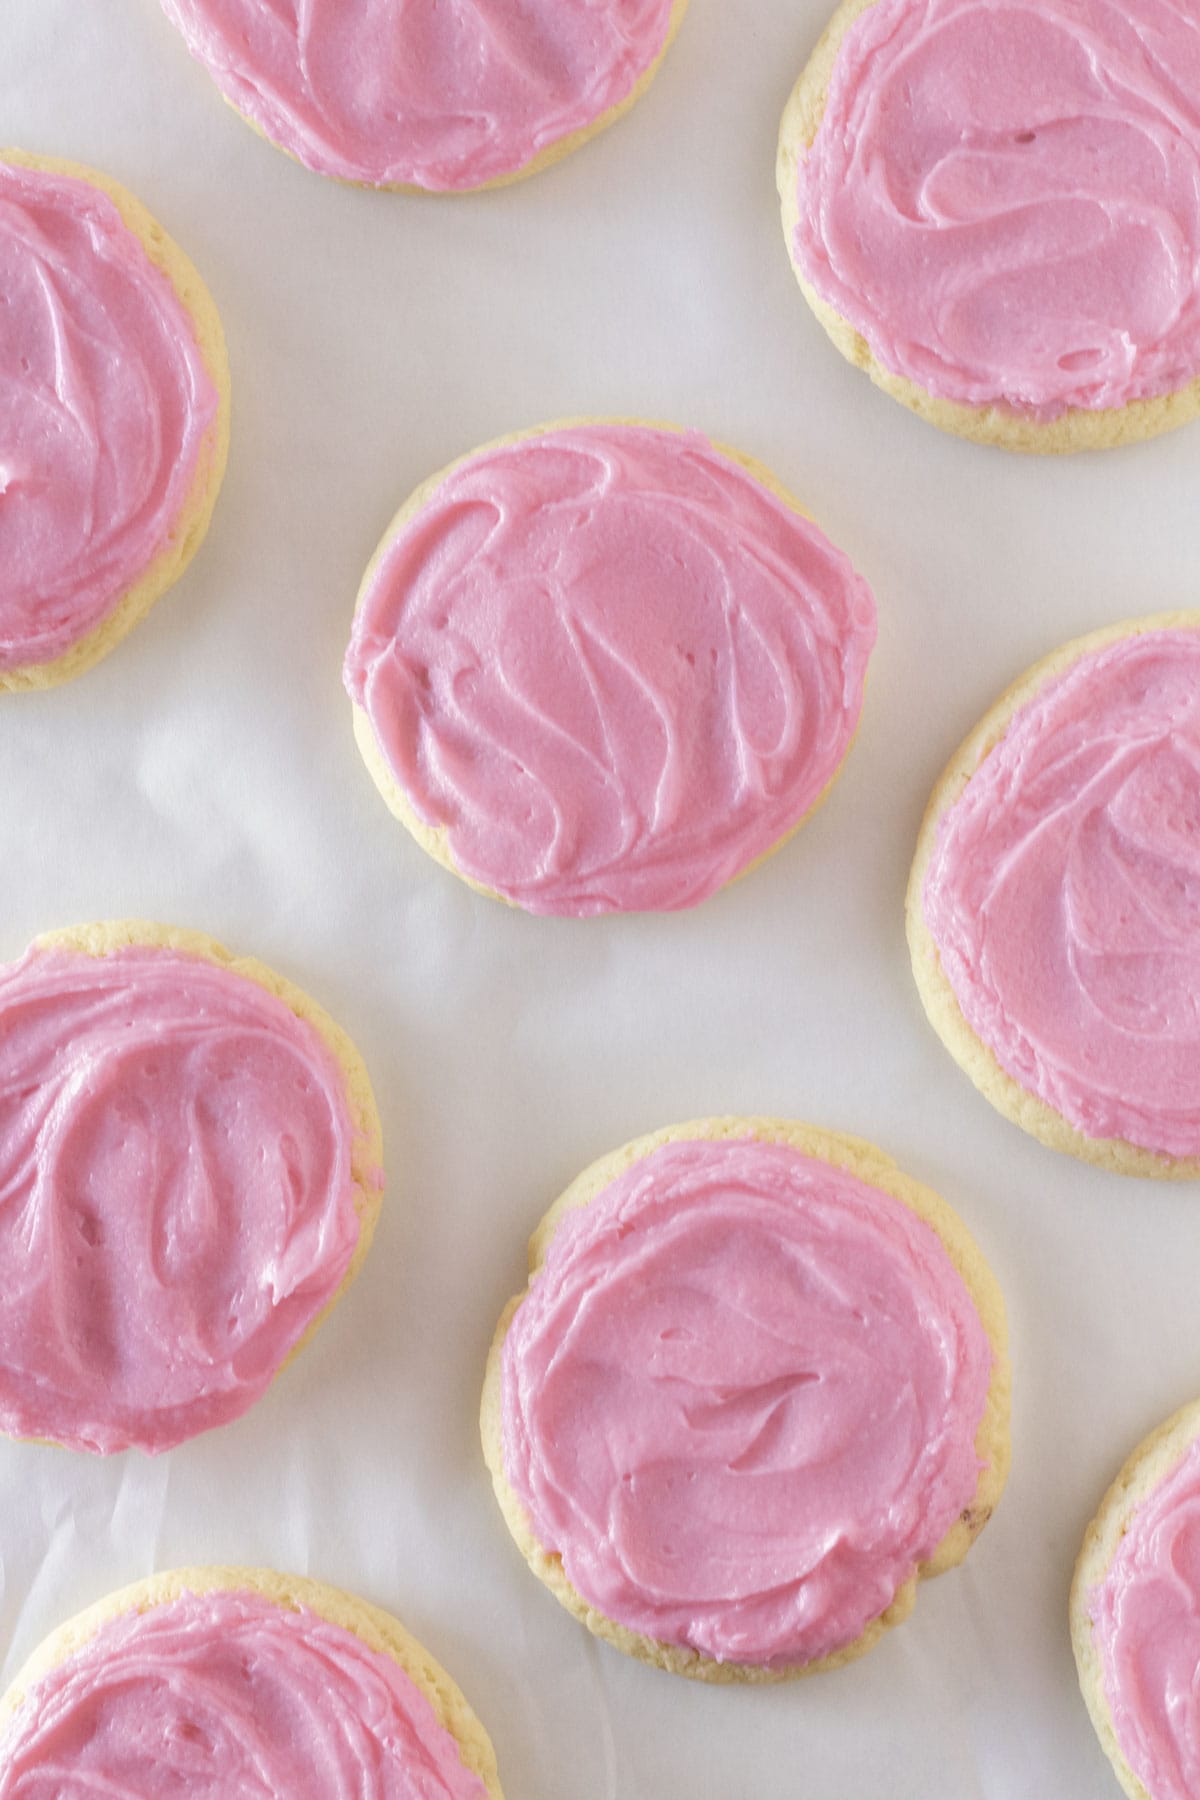 Looking down on chilled sugar cookies with pink frosting.